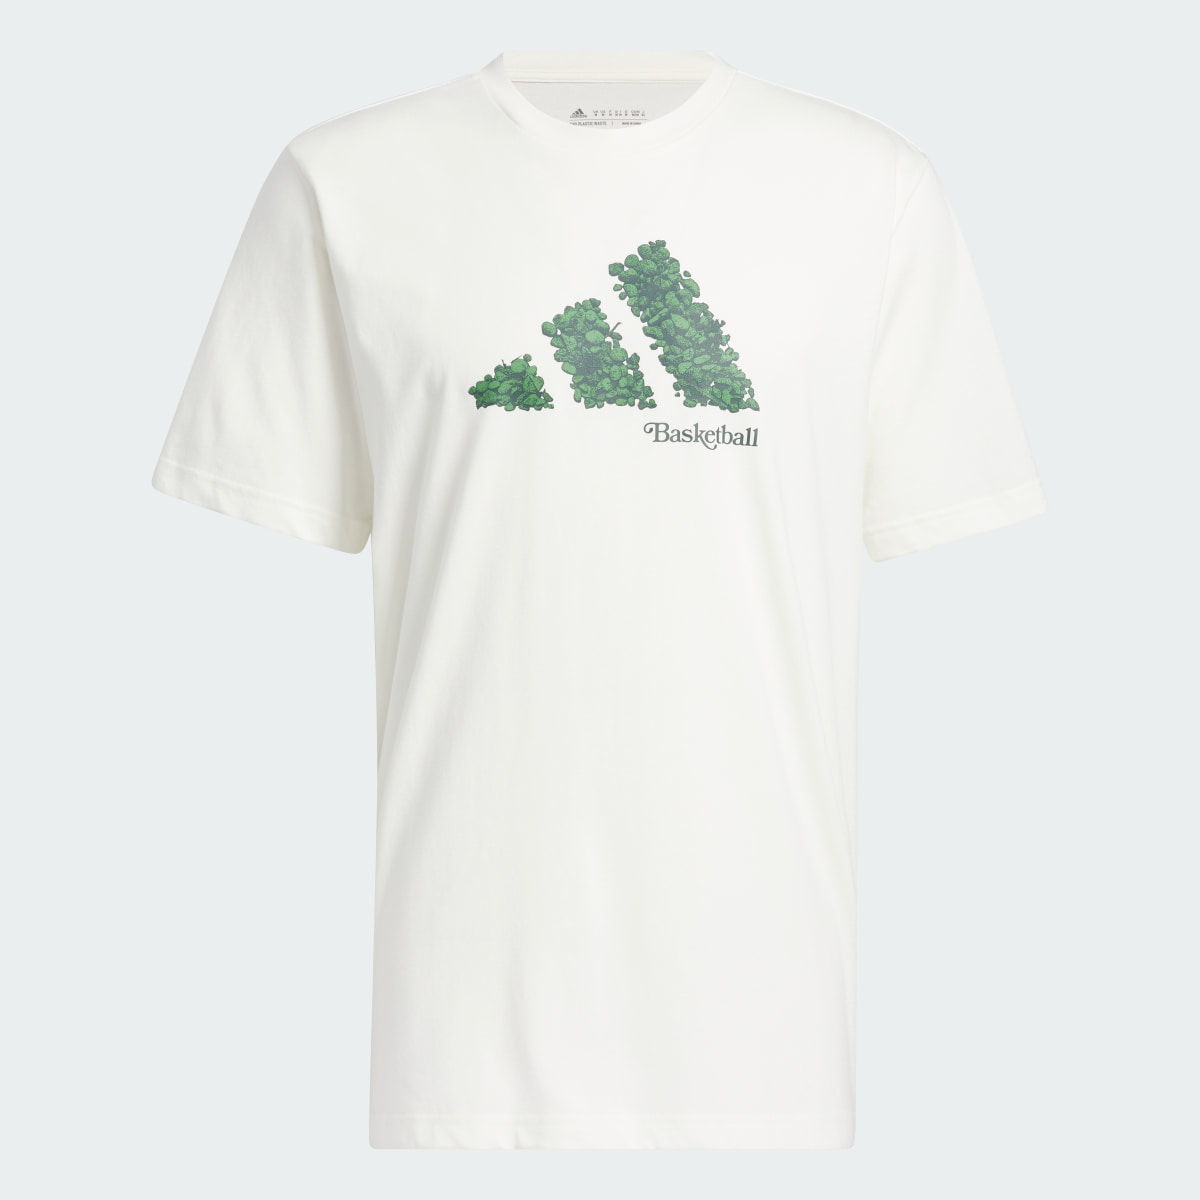 Adidas T-shirt graphique Court Therapy. 5